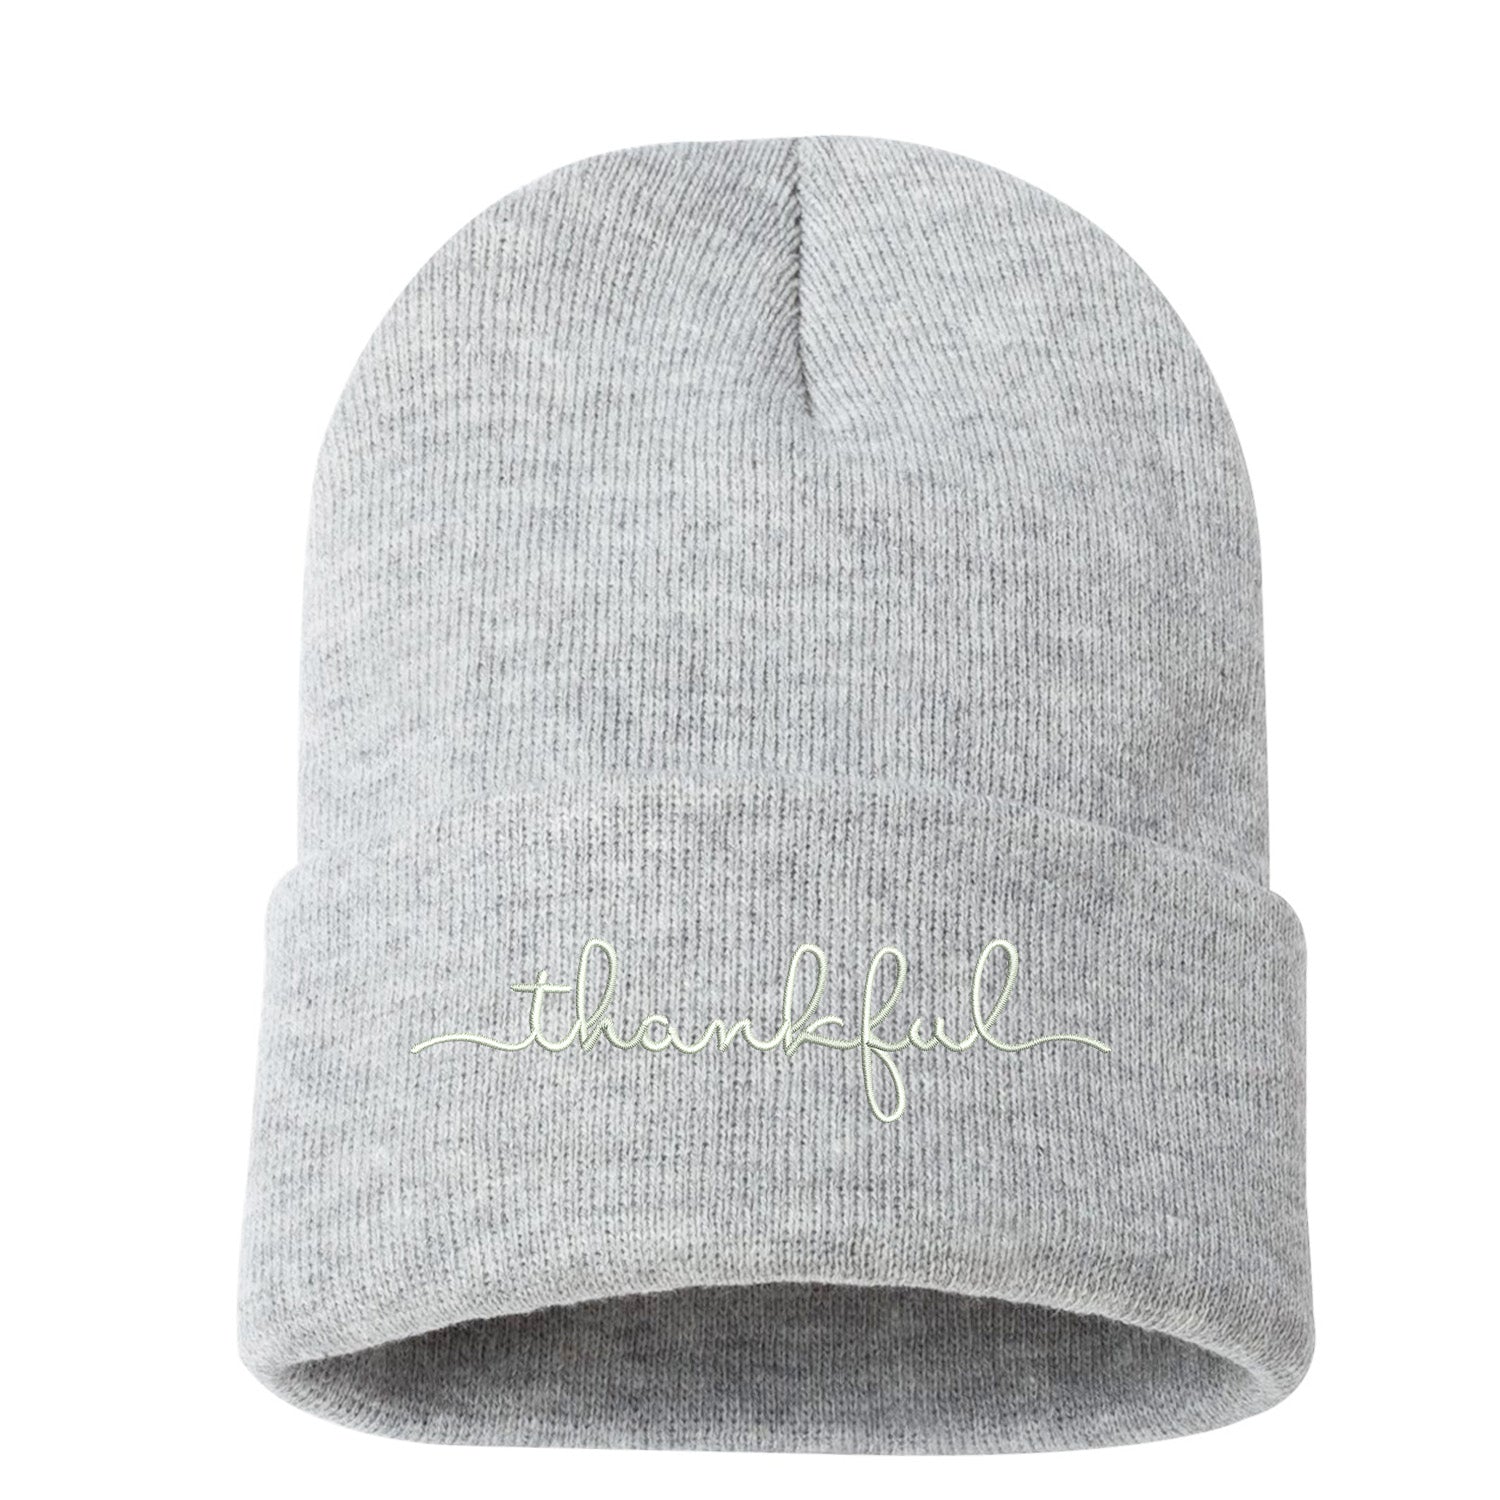 Heather Gray Beanie embroidered with Thankful Cuffed Beanie - DSY Lifestyle